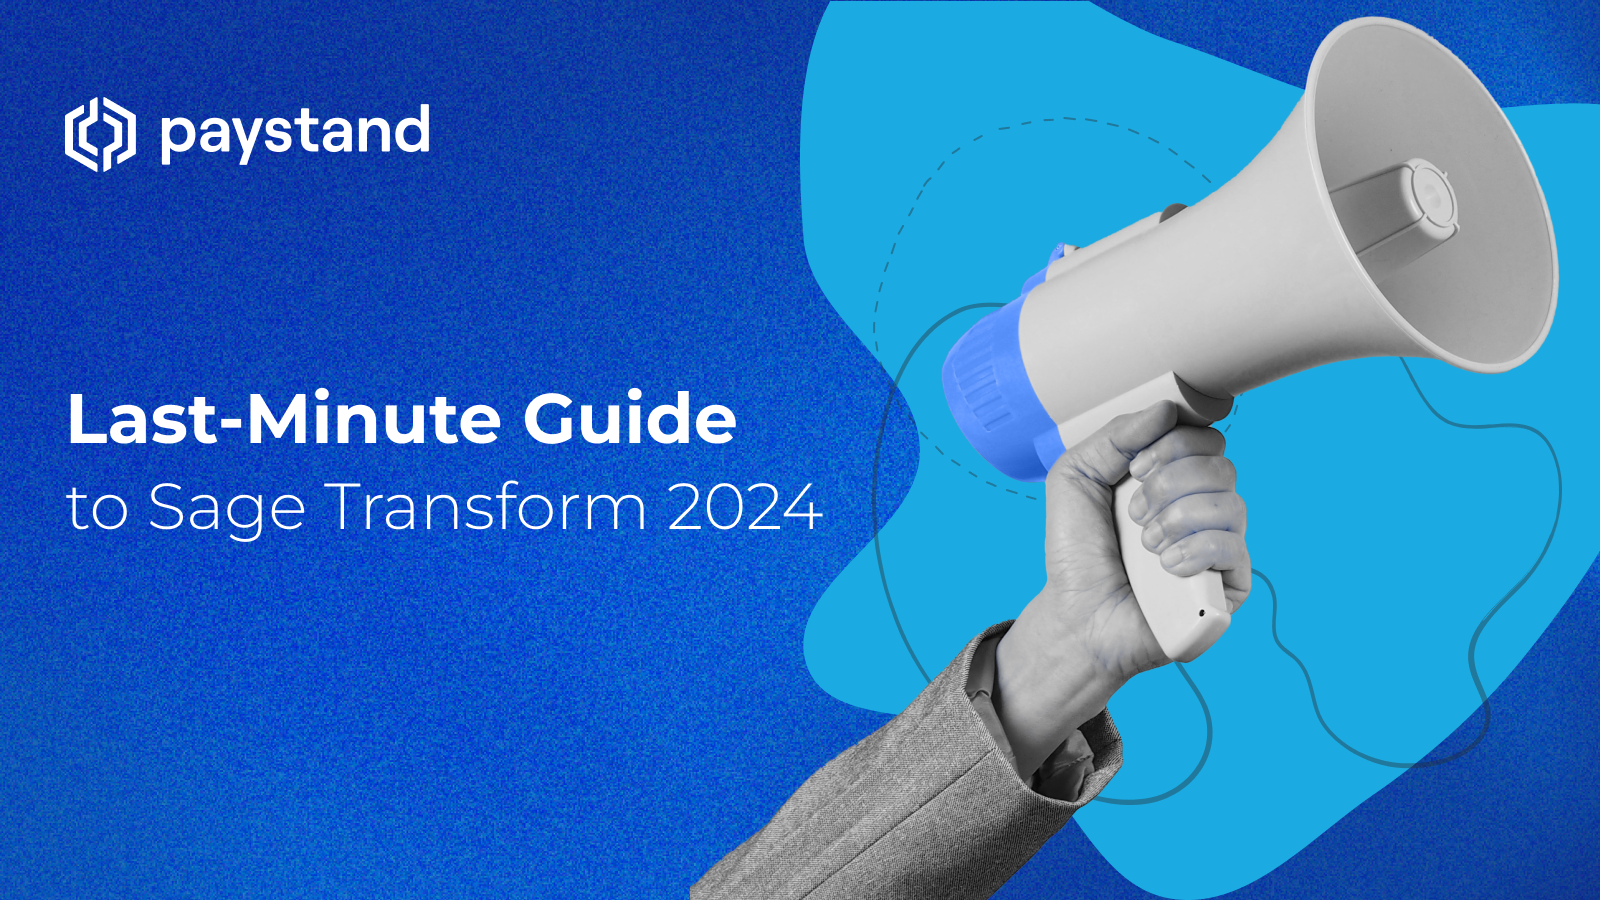 Last-Minute Guide to Sage Transform 2024